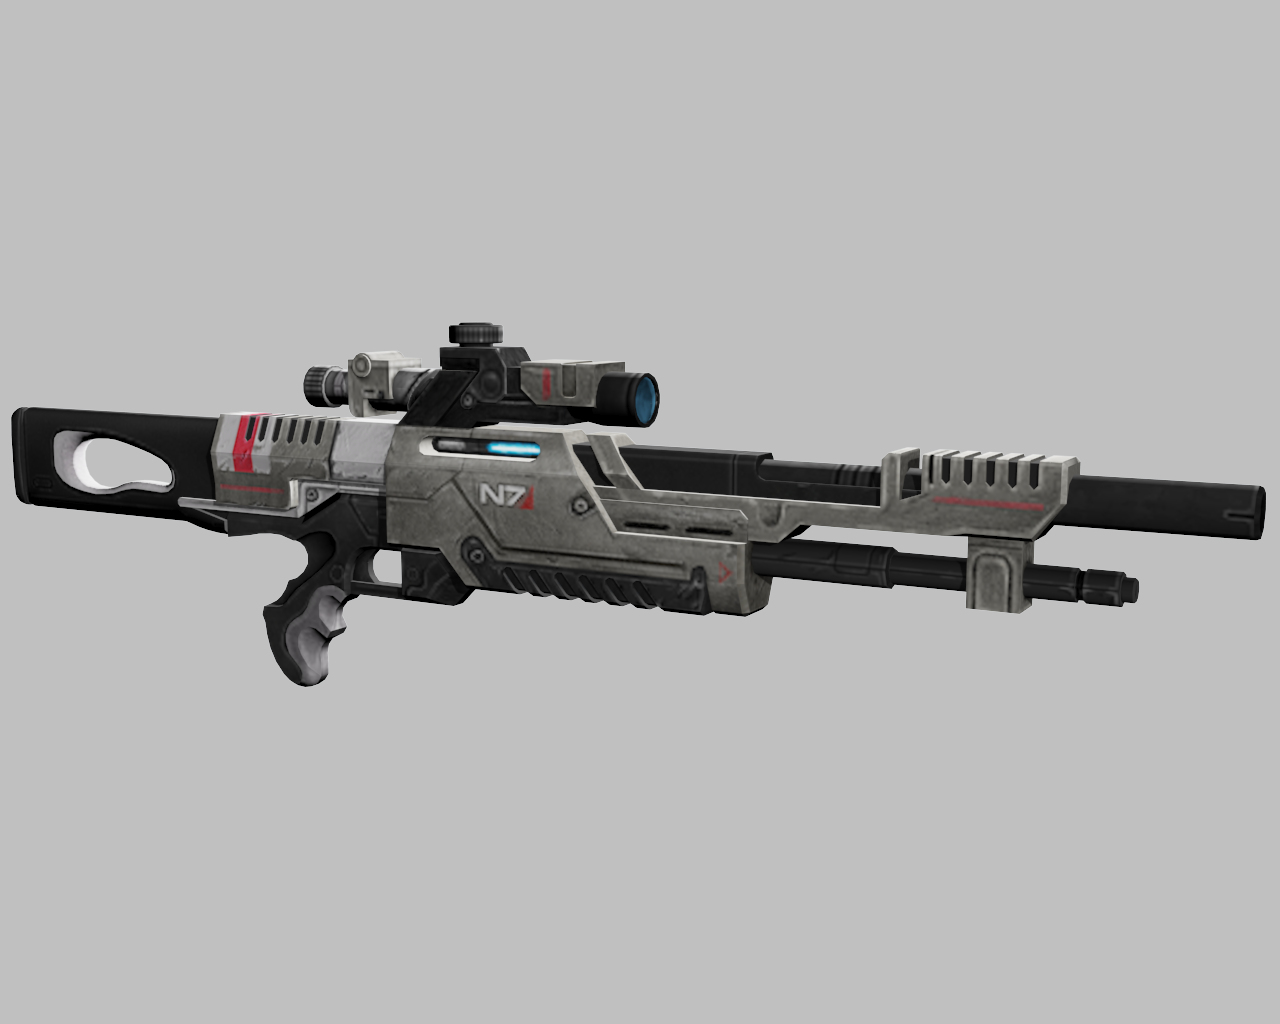 A render of the N7 Valiant sniper rifle.